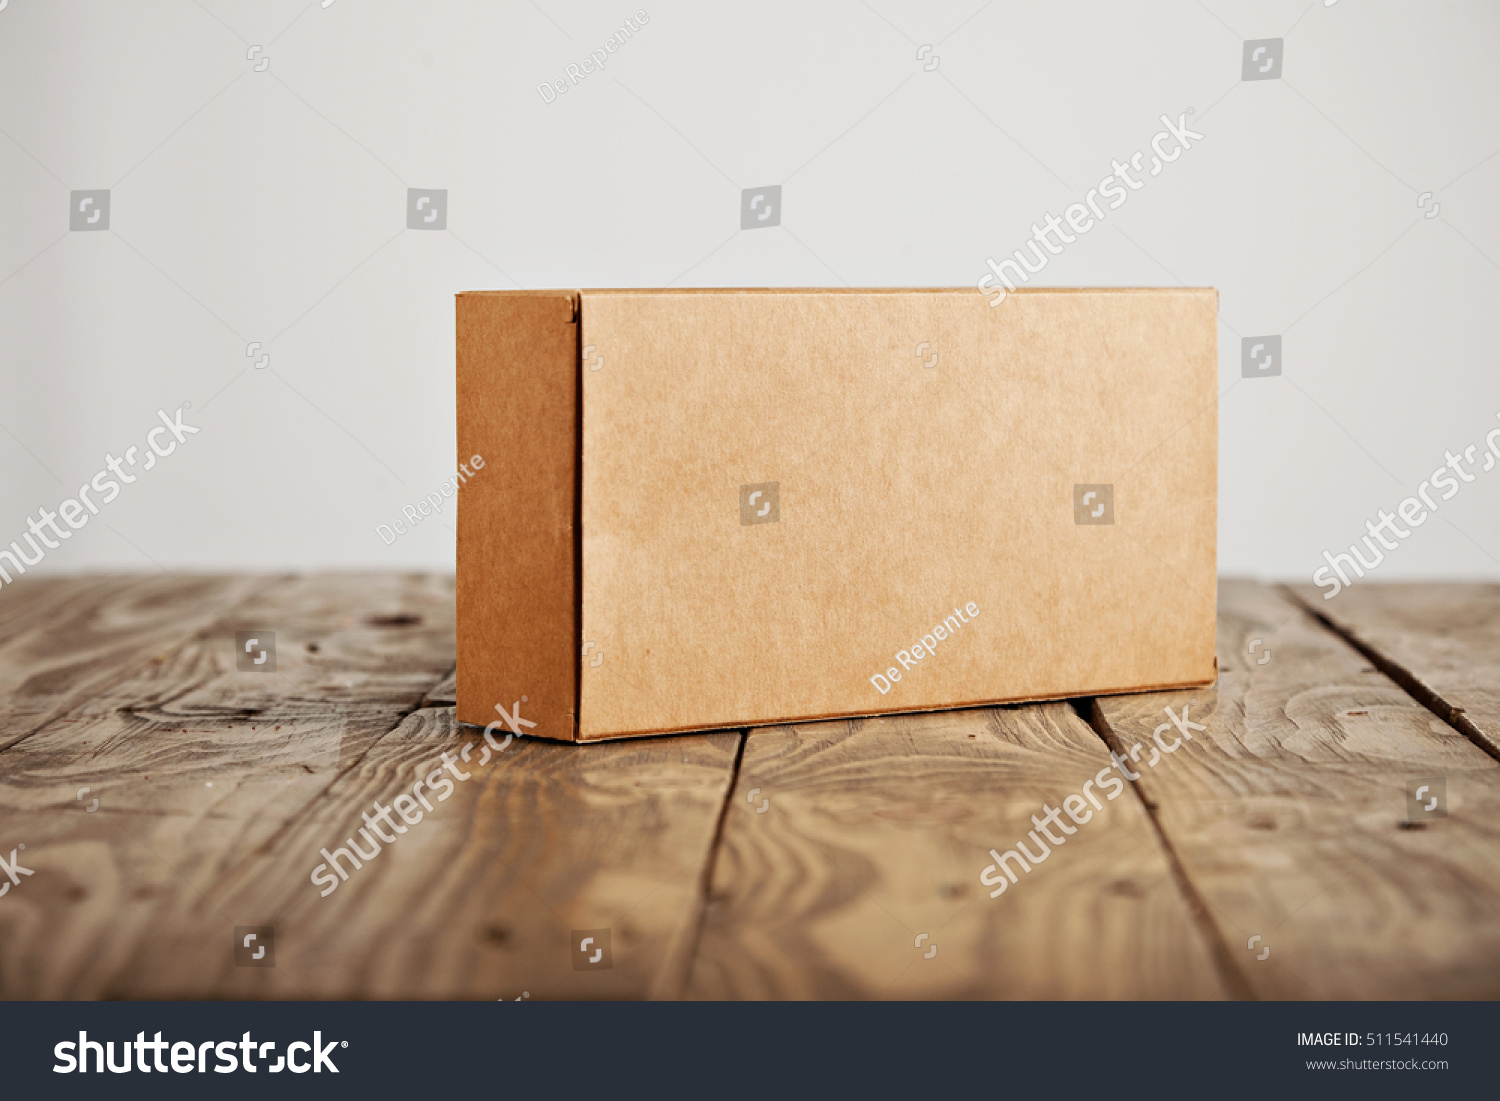 Craft unlabeled cardboard package box presented on stressed brushed wooden table, isolated on white background #511541440